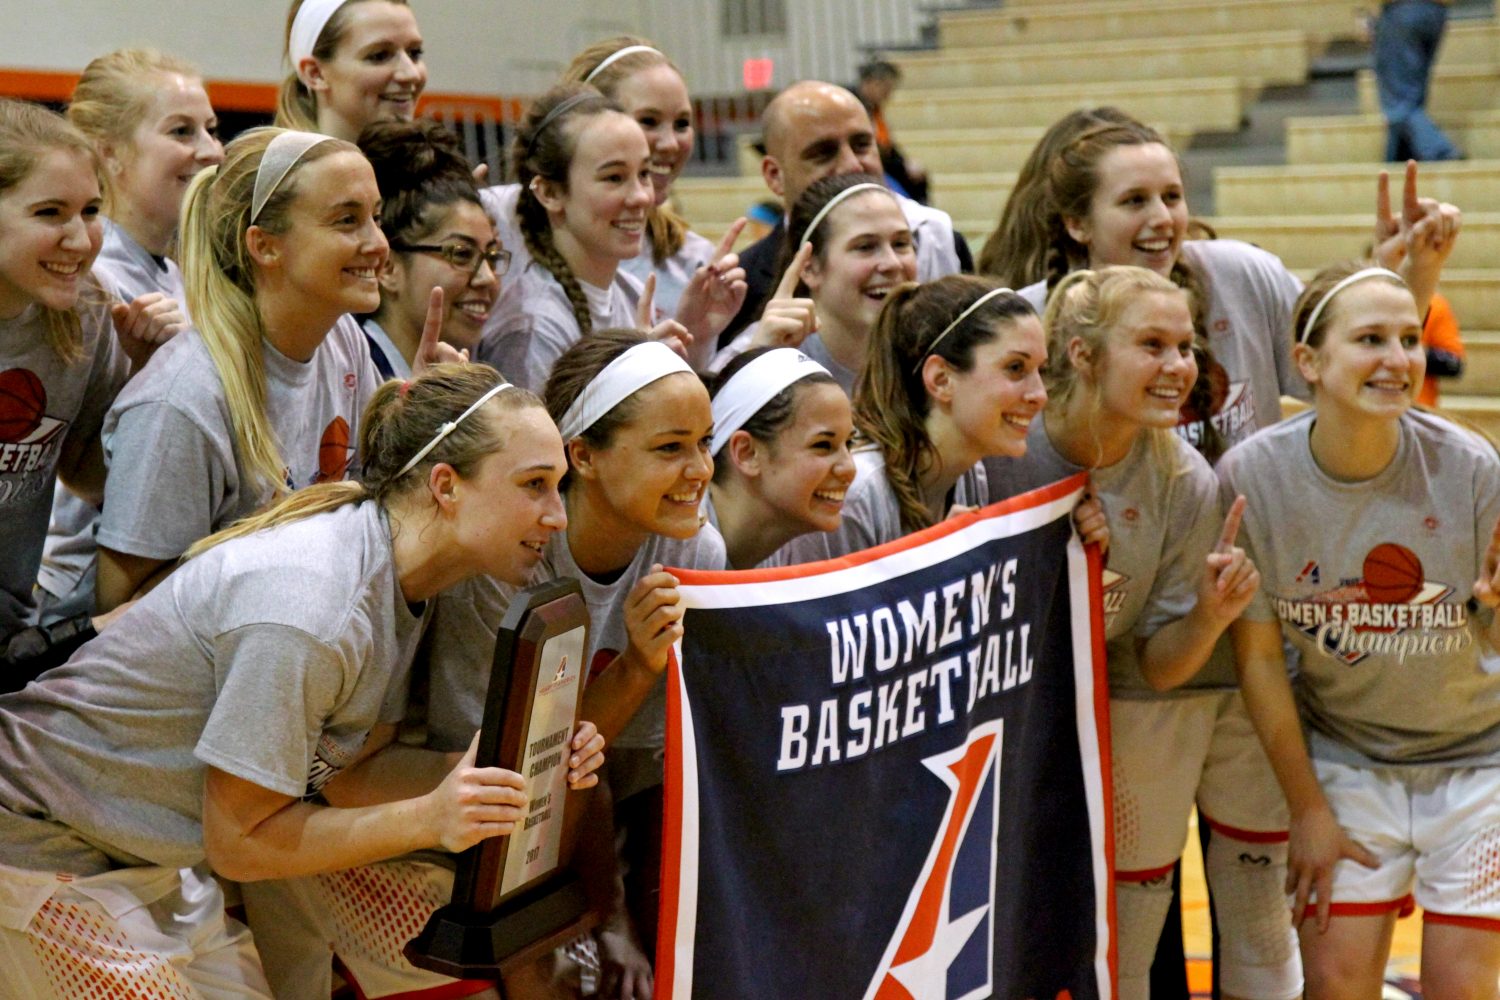 The Baker womens basketball players pose for a photo with their Heart championship banner after defeating Benedictine 64-51. The team won its first-ever Heart Conference Tournament title along with the regular-season championship. Photo by Chad Phillips.